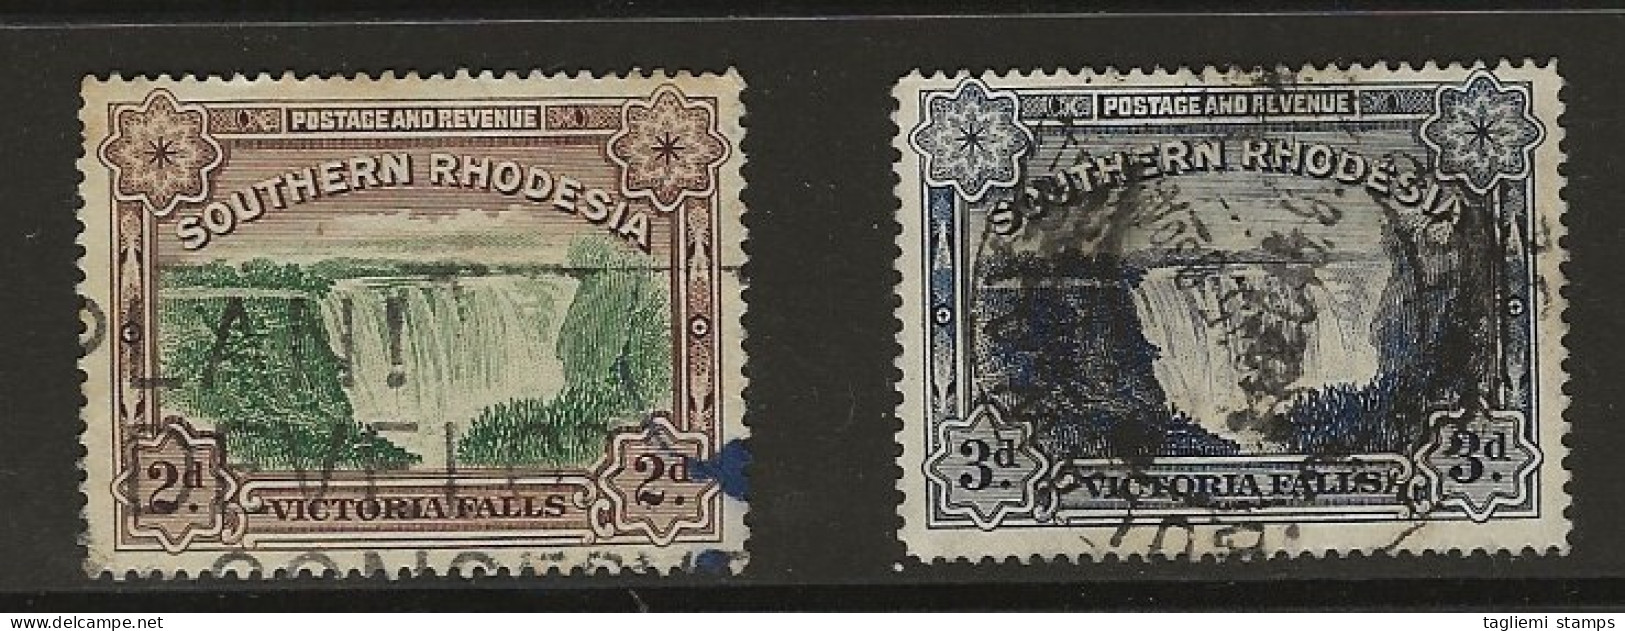 Southern Rhodesia, 1935, SG 35 & 35a, Used - Southern Rhodesia (...-1964)